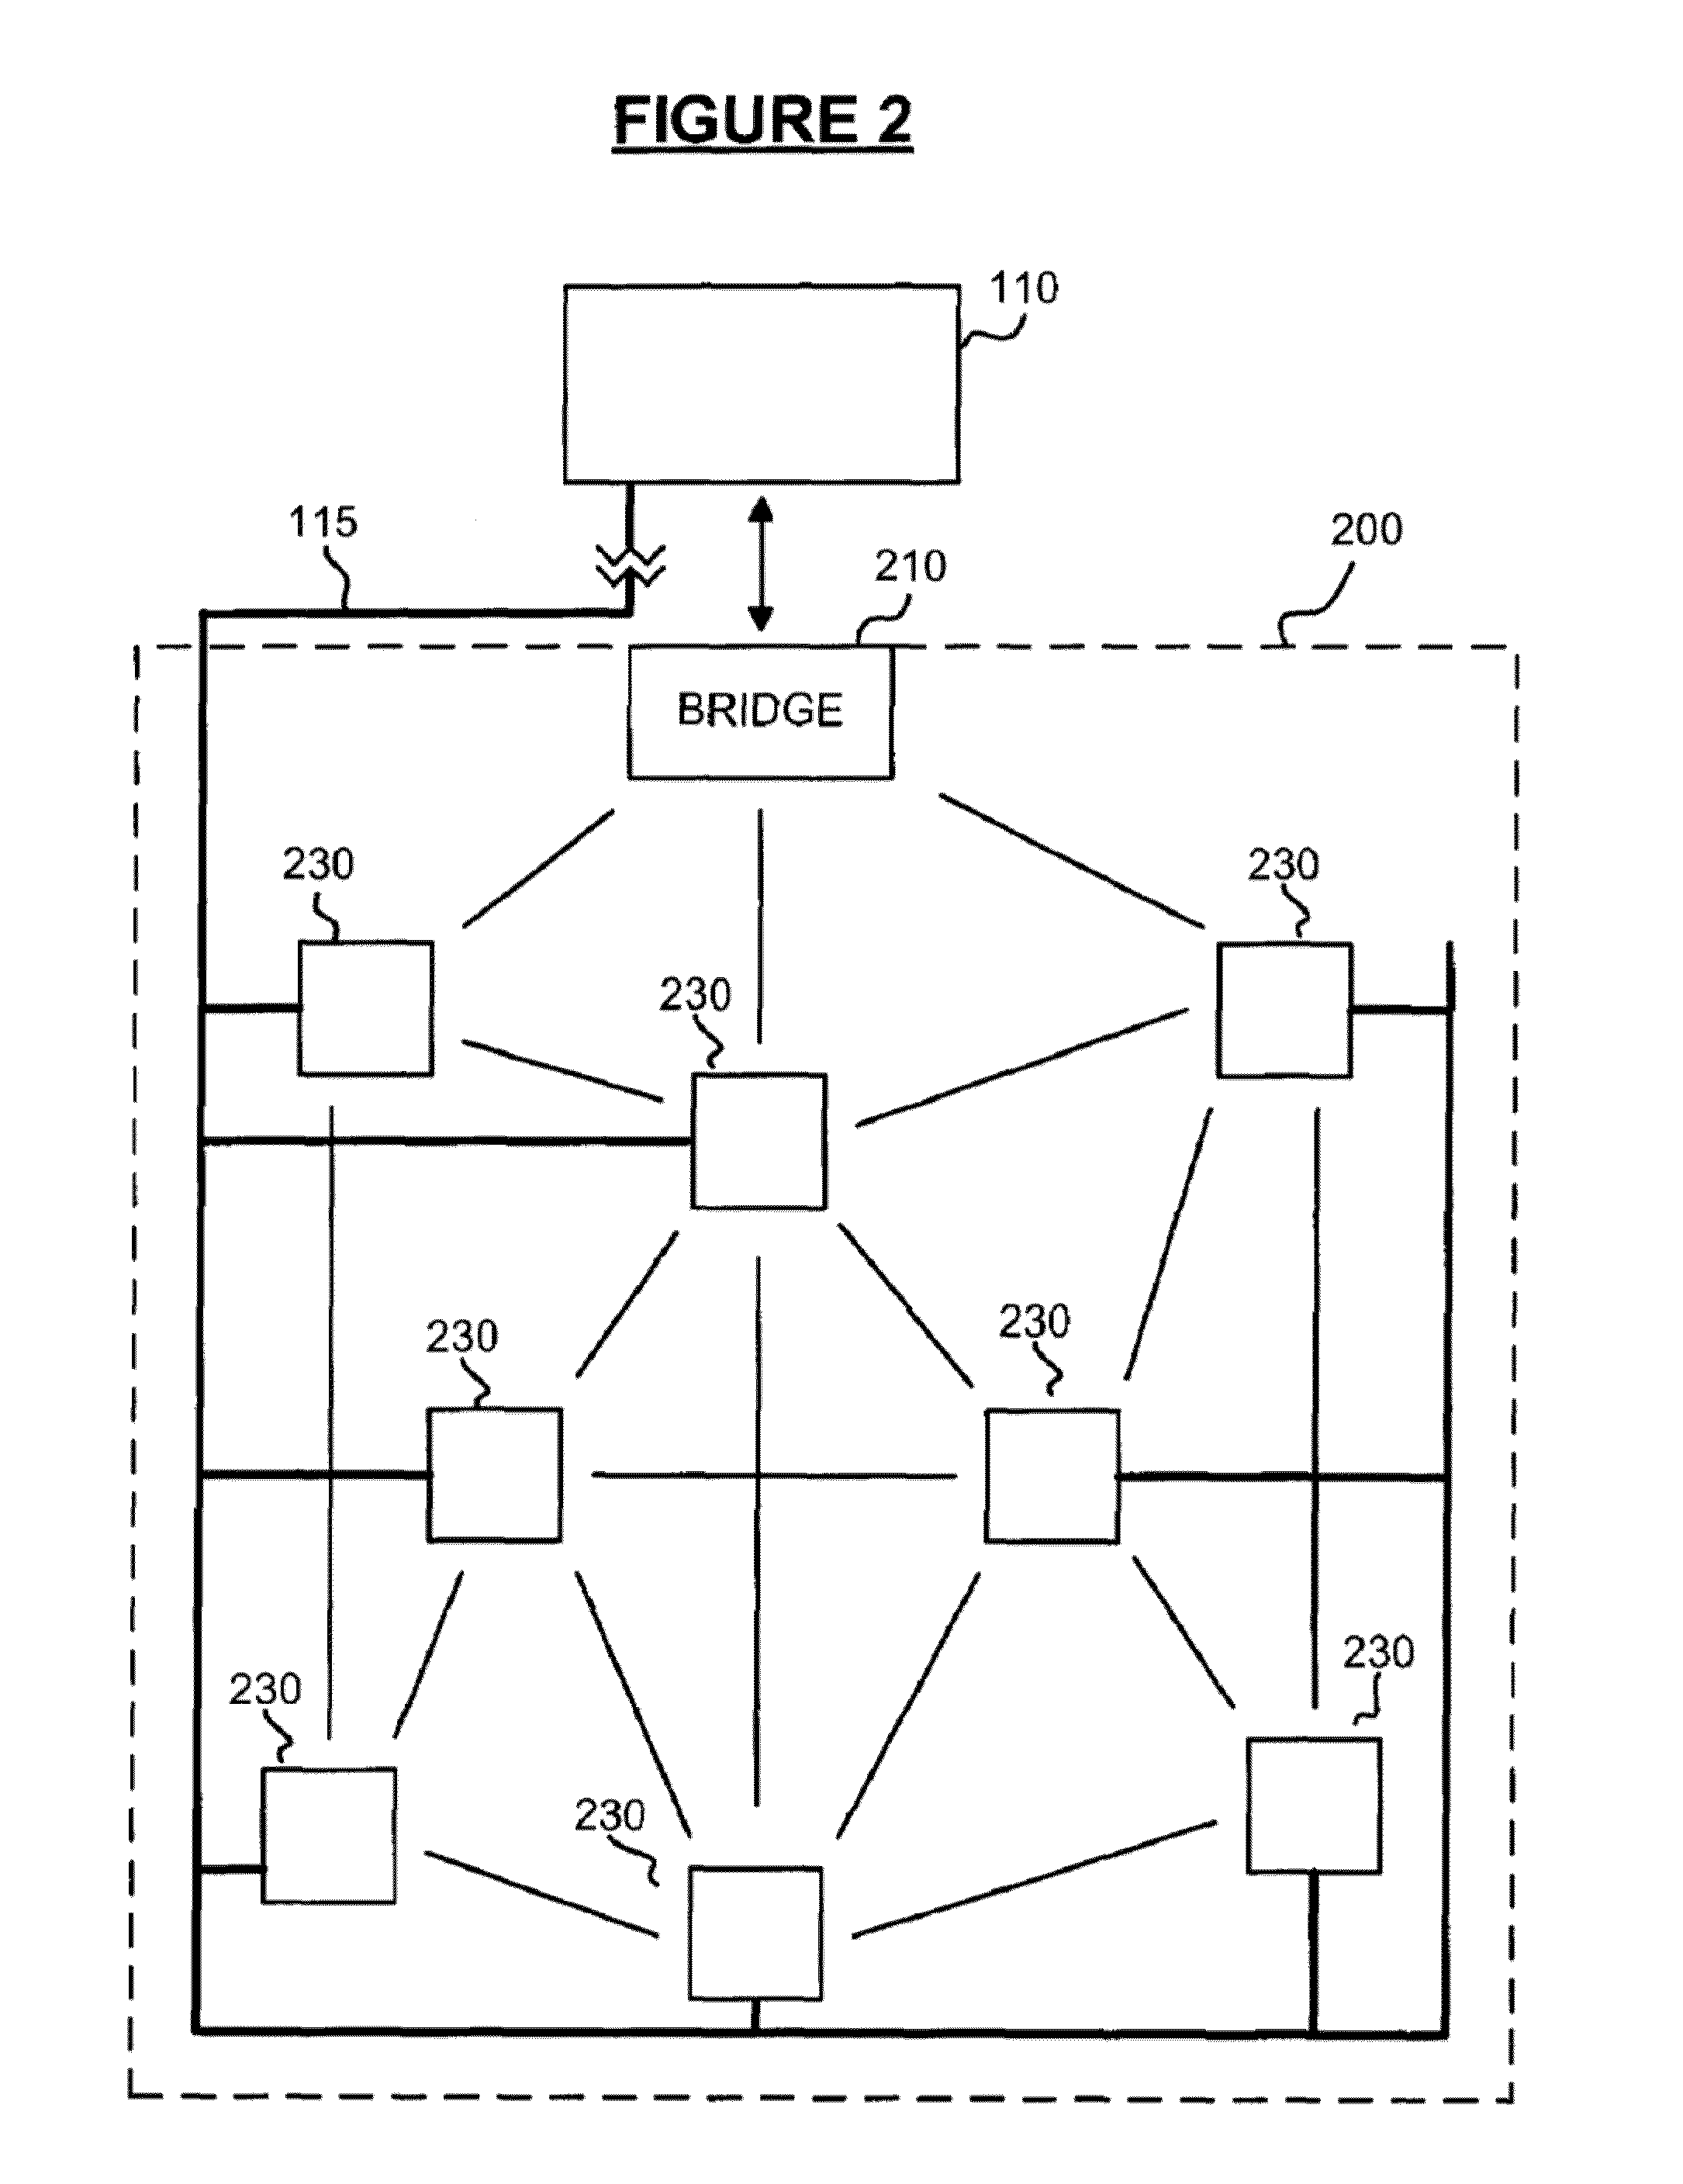 Systems and methods for generating power through the flow of water